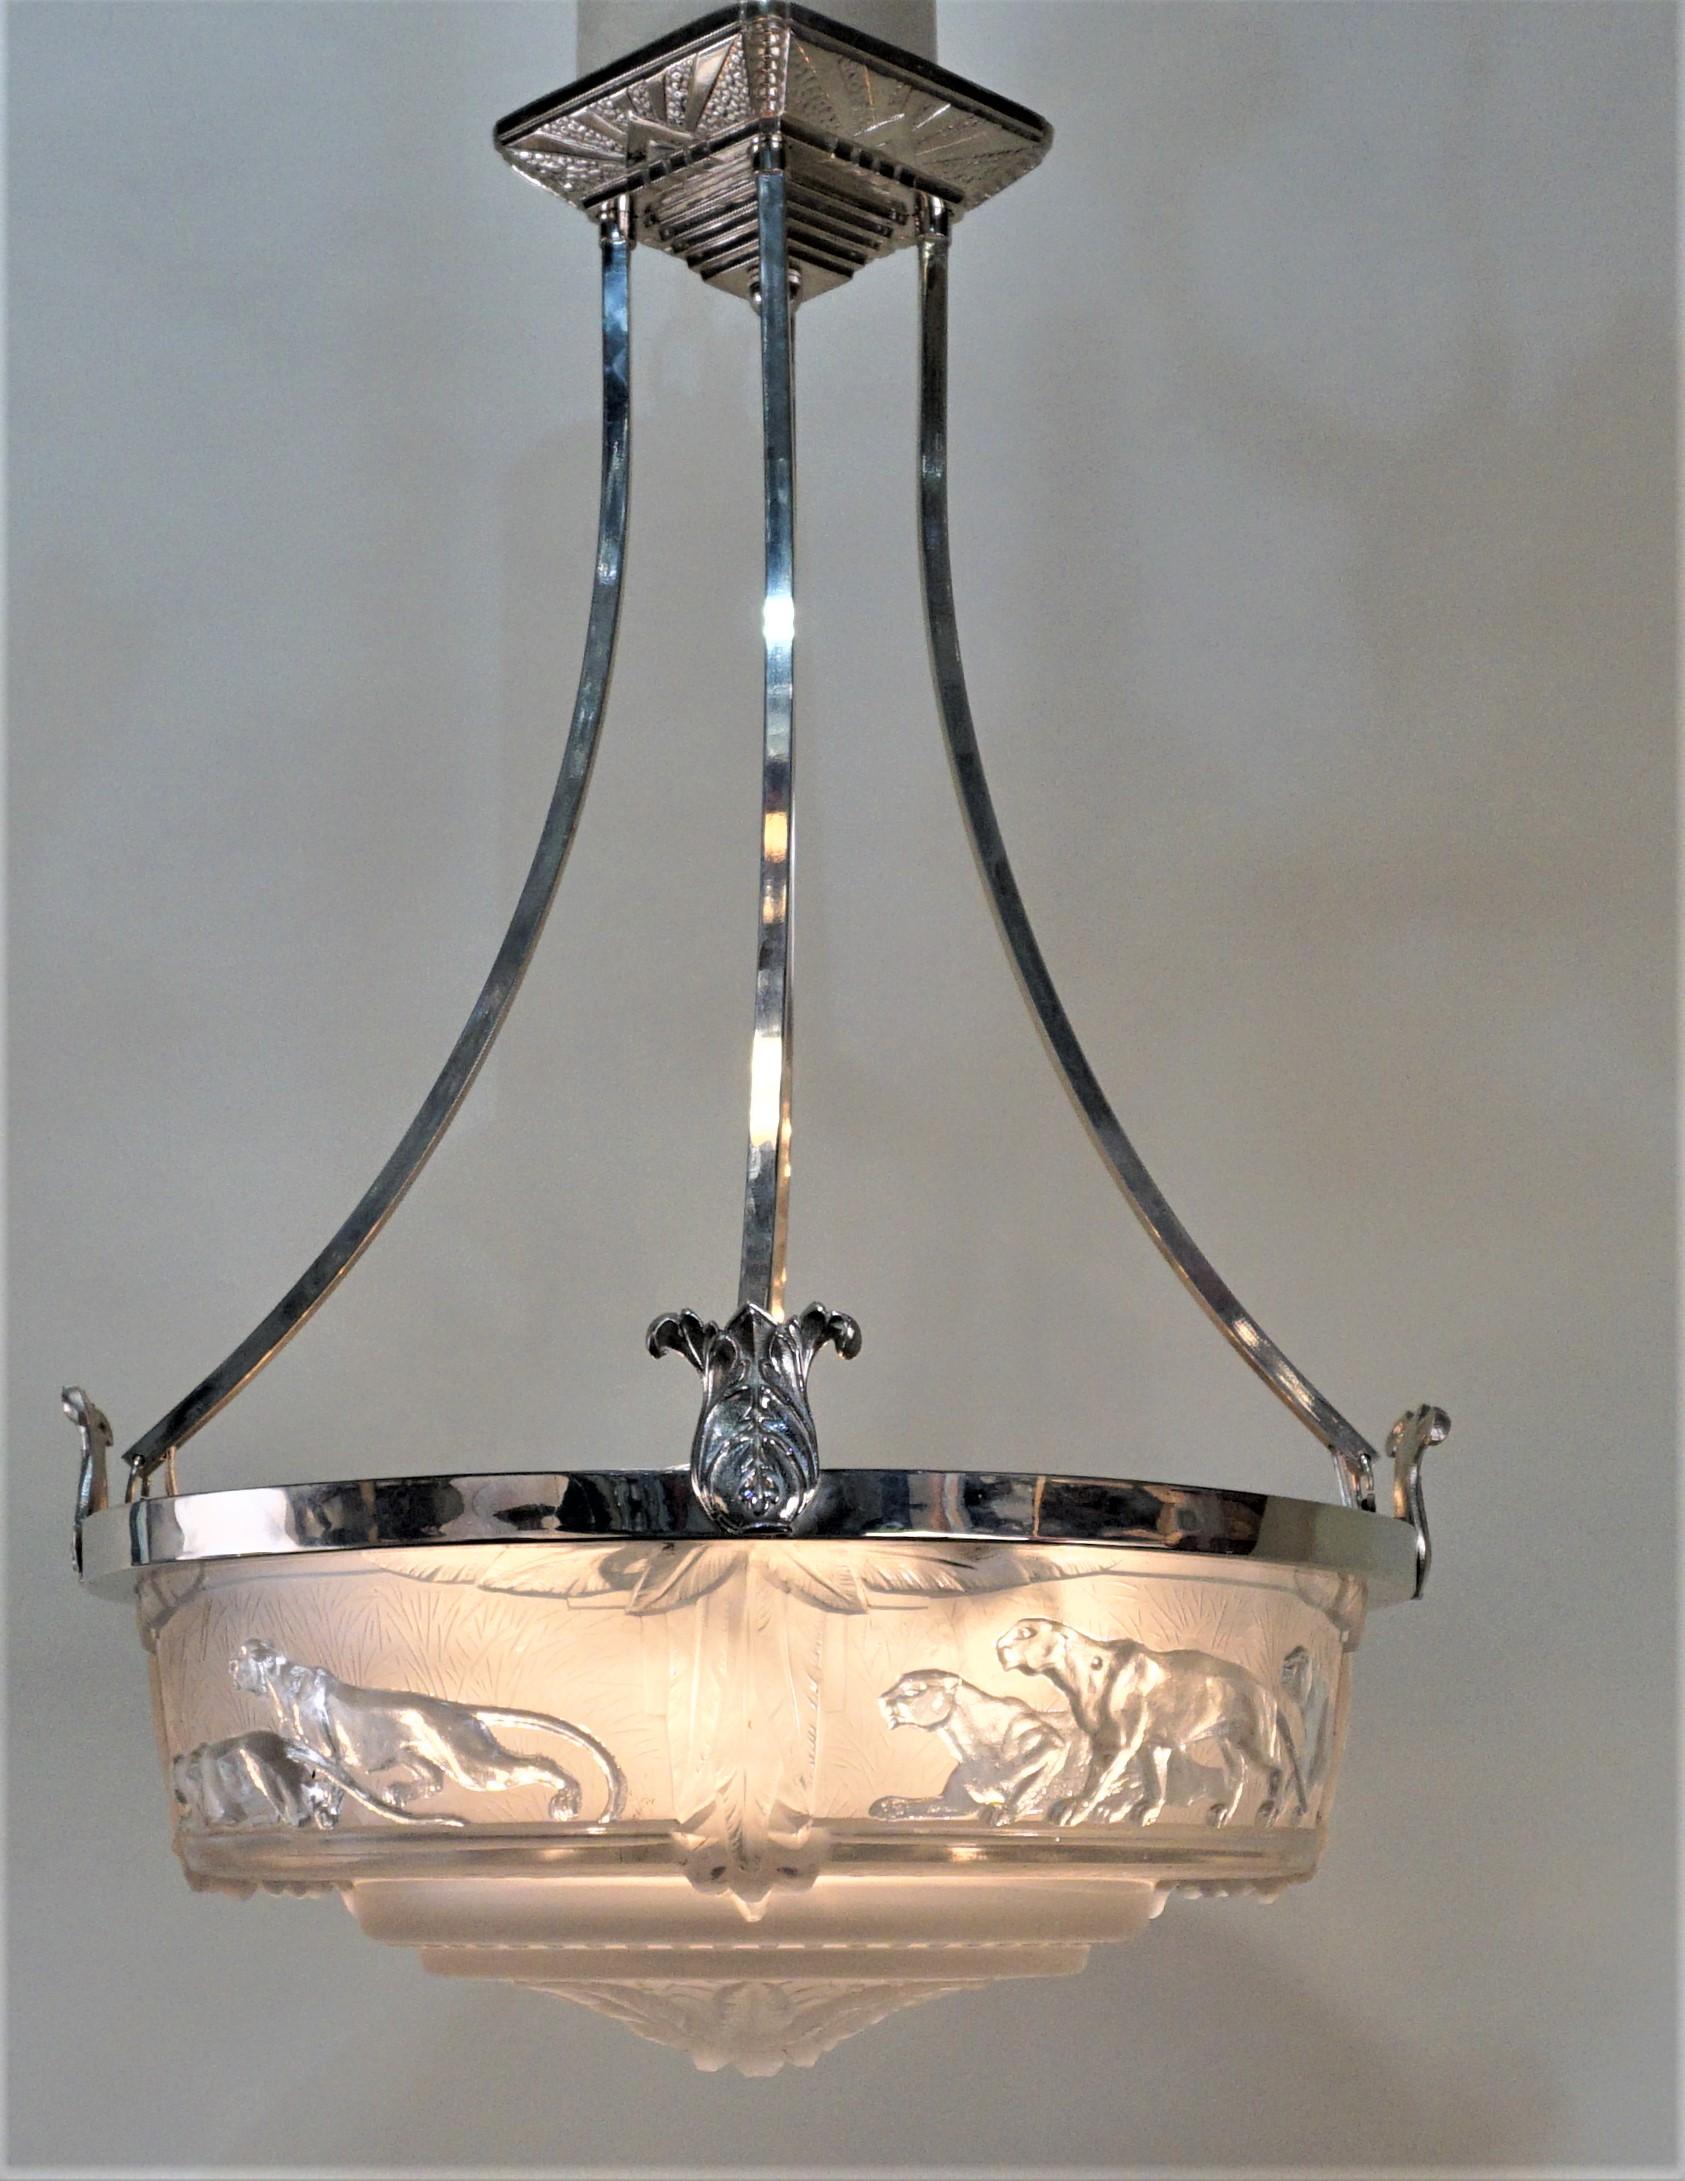 Frost glass in clear and frost features panthers, nickel on bronze frame chandelier.
Height can be adjusted by cutting the rods.
Eight lights 60 watts max each.